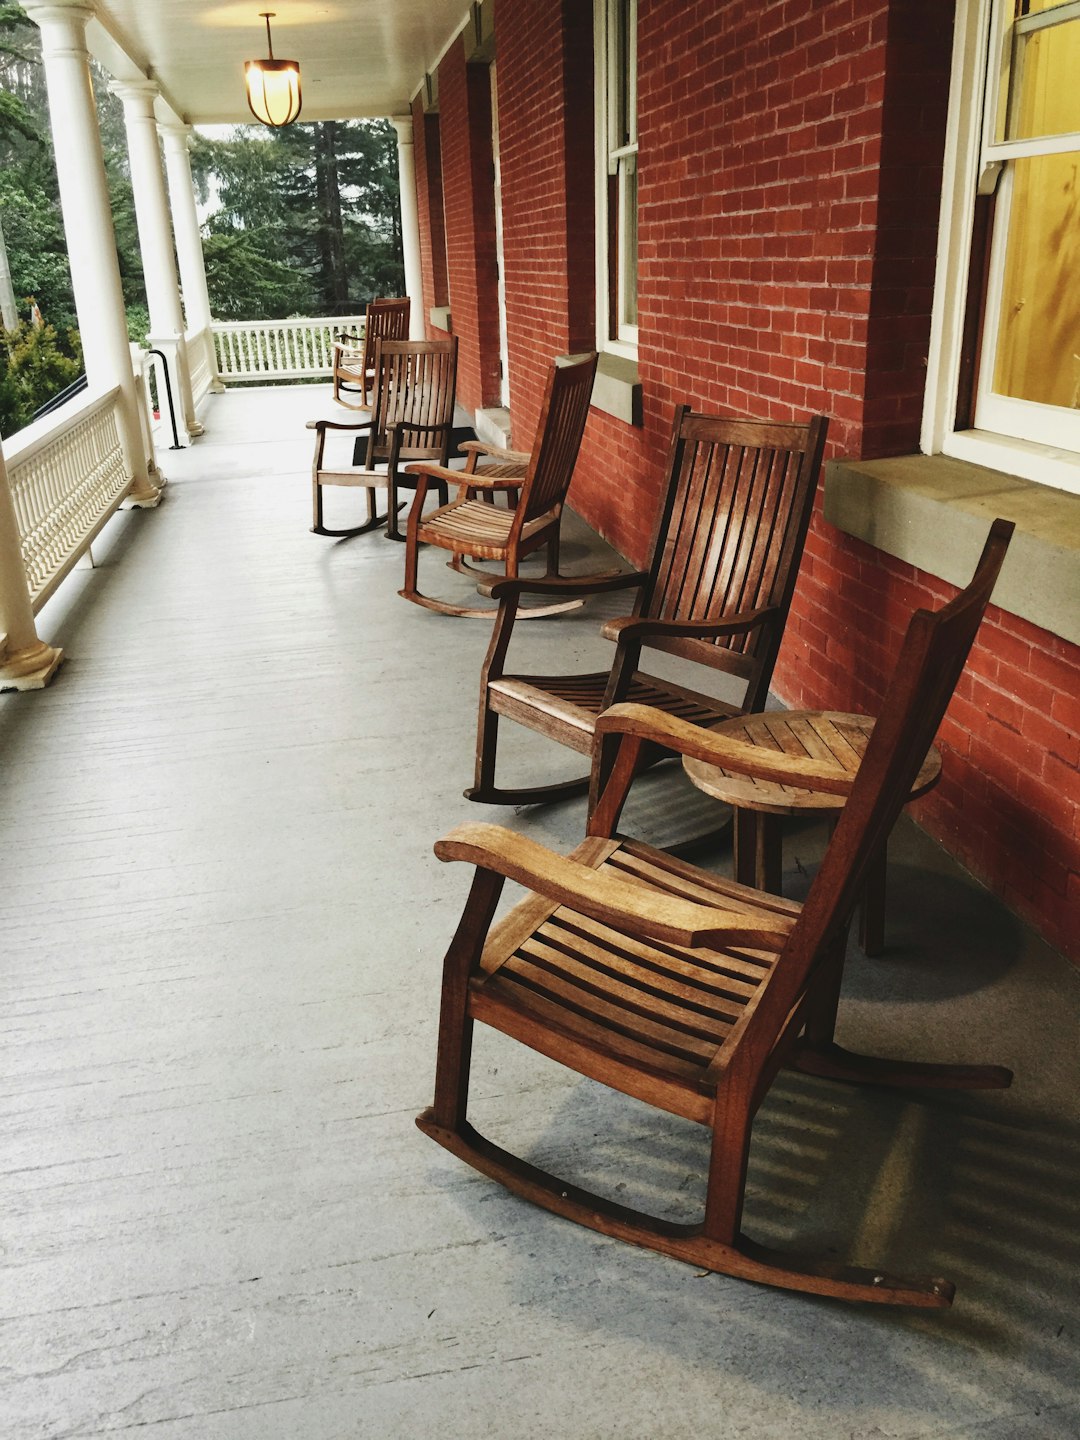 empty wooden chairs